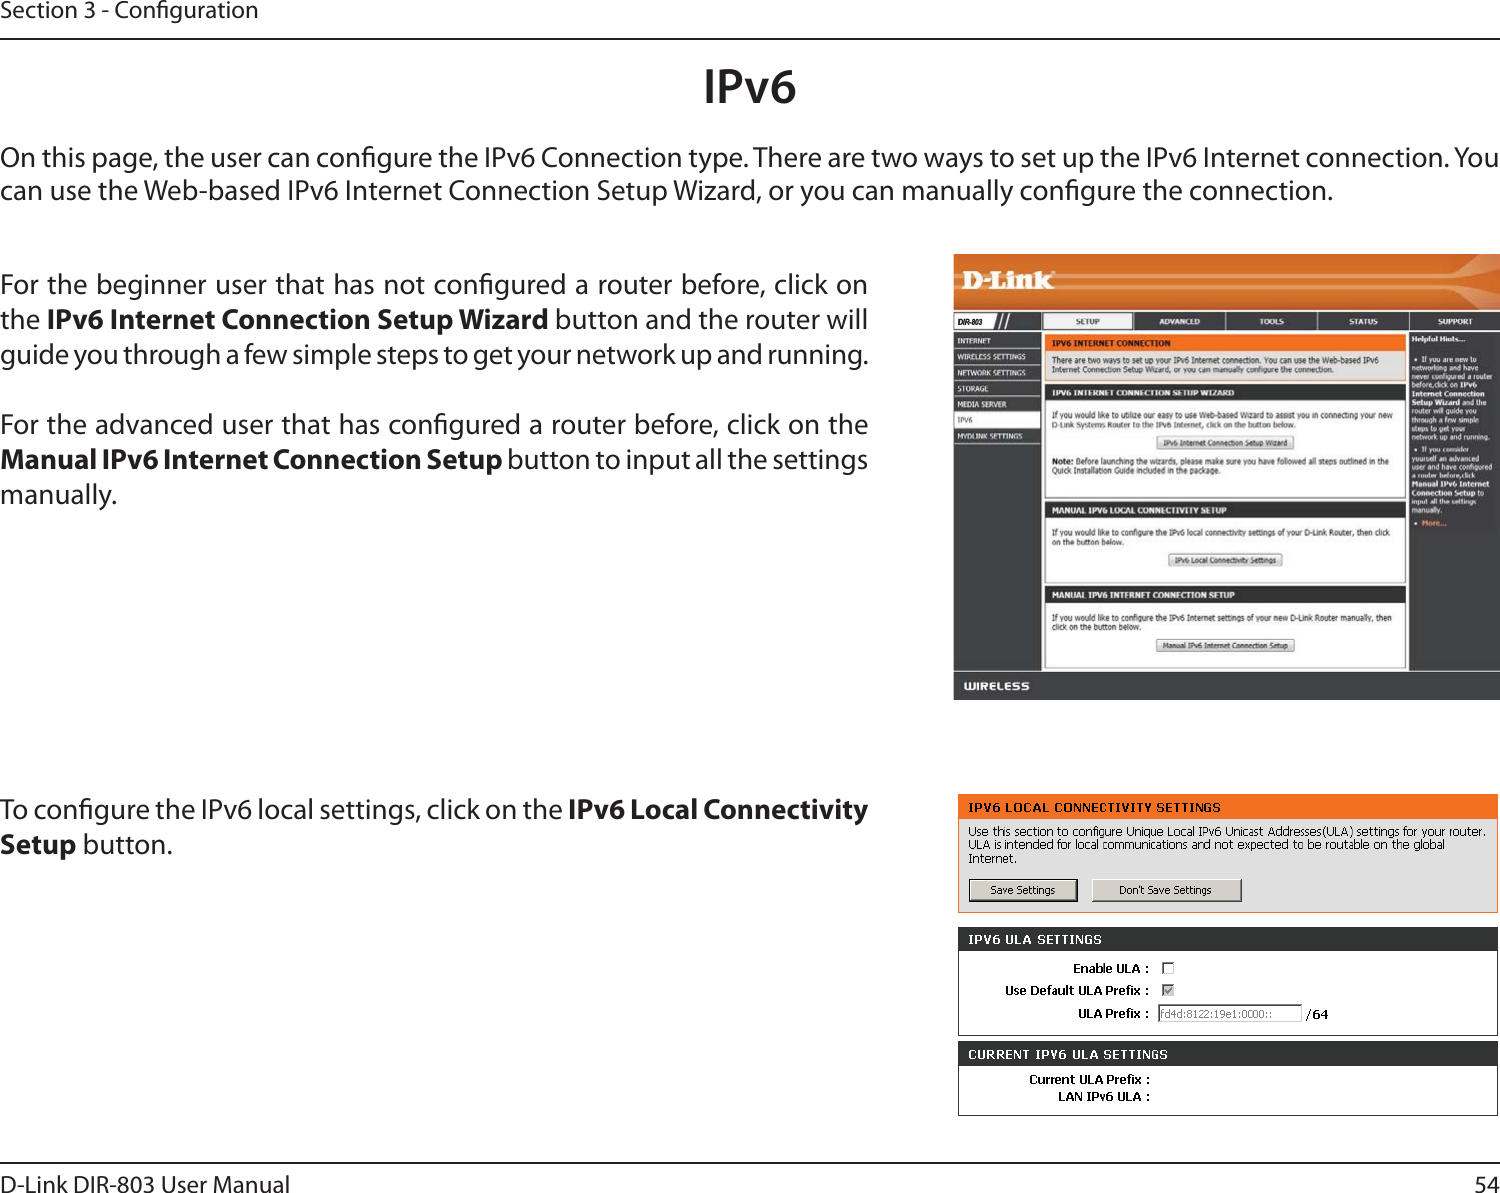 54D-Link DIR-803 User ManualSection 3 - CongurationIPv6On this page, the user can congure the IPv6 Connection type. There are two ways to set up the IPv6 Internet connection. You can use the Web-based IPv6 Internet Connection Setup Wizard, or you can manually congure the connection.For the beginner user that has not congured a router before, click on the IPv6 Internet Connection Setup Wizard button and the router will guide you through a few simple steps to get your network up and running.For the advanced user that has congured a router before, click on the Manual IPv6 Internet Connection Setup button to input all the settings manually.To congure the IPv6 local settings, click on the IPv6 Local Connectivity Setup button.&apos;,5